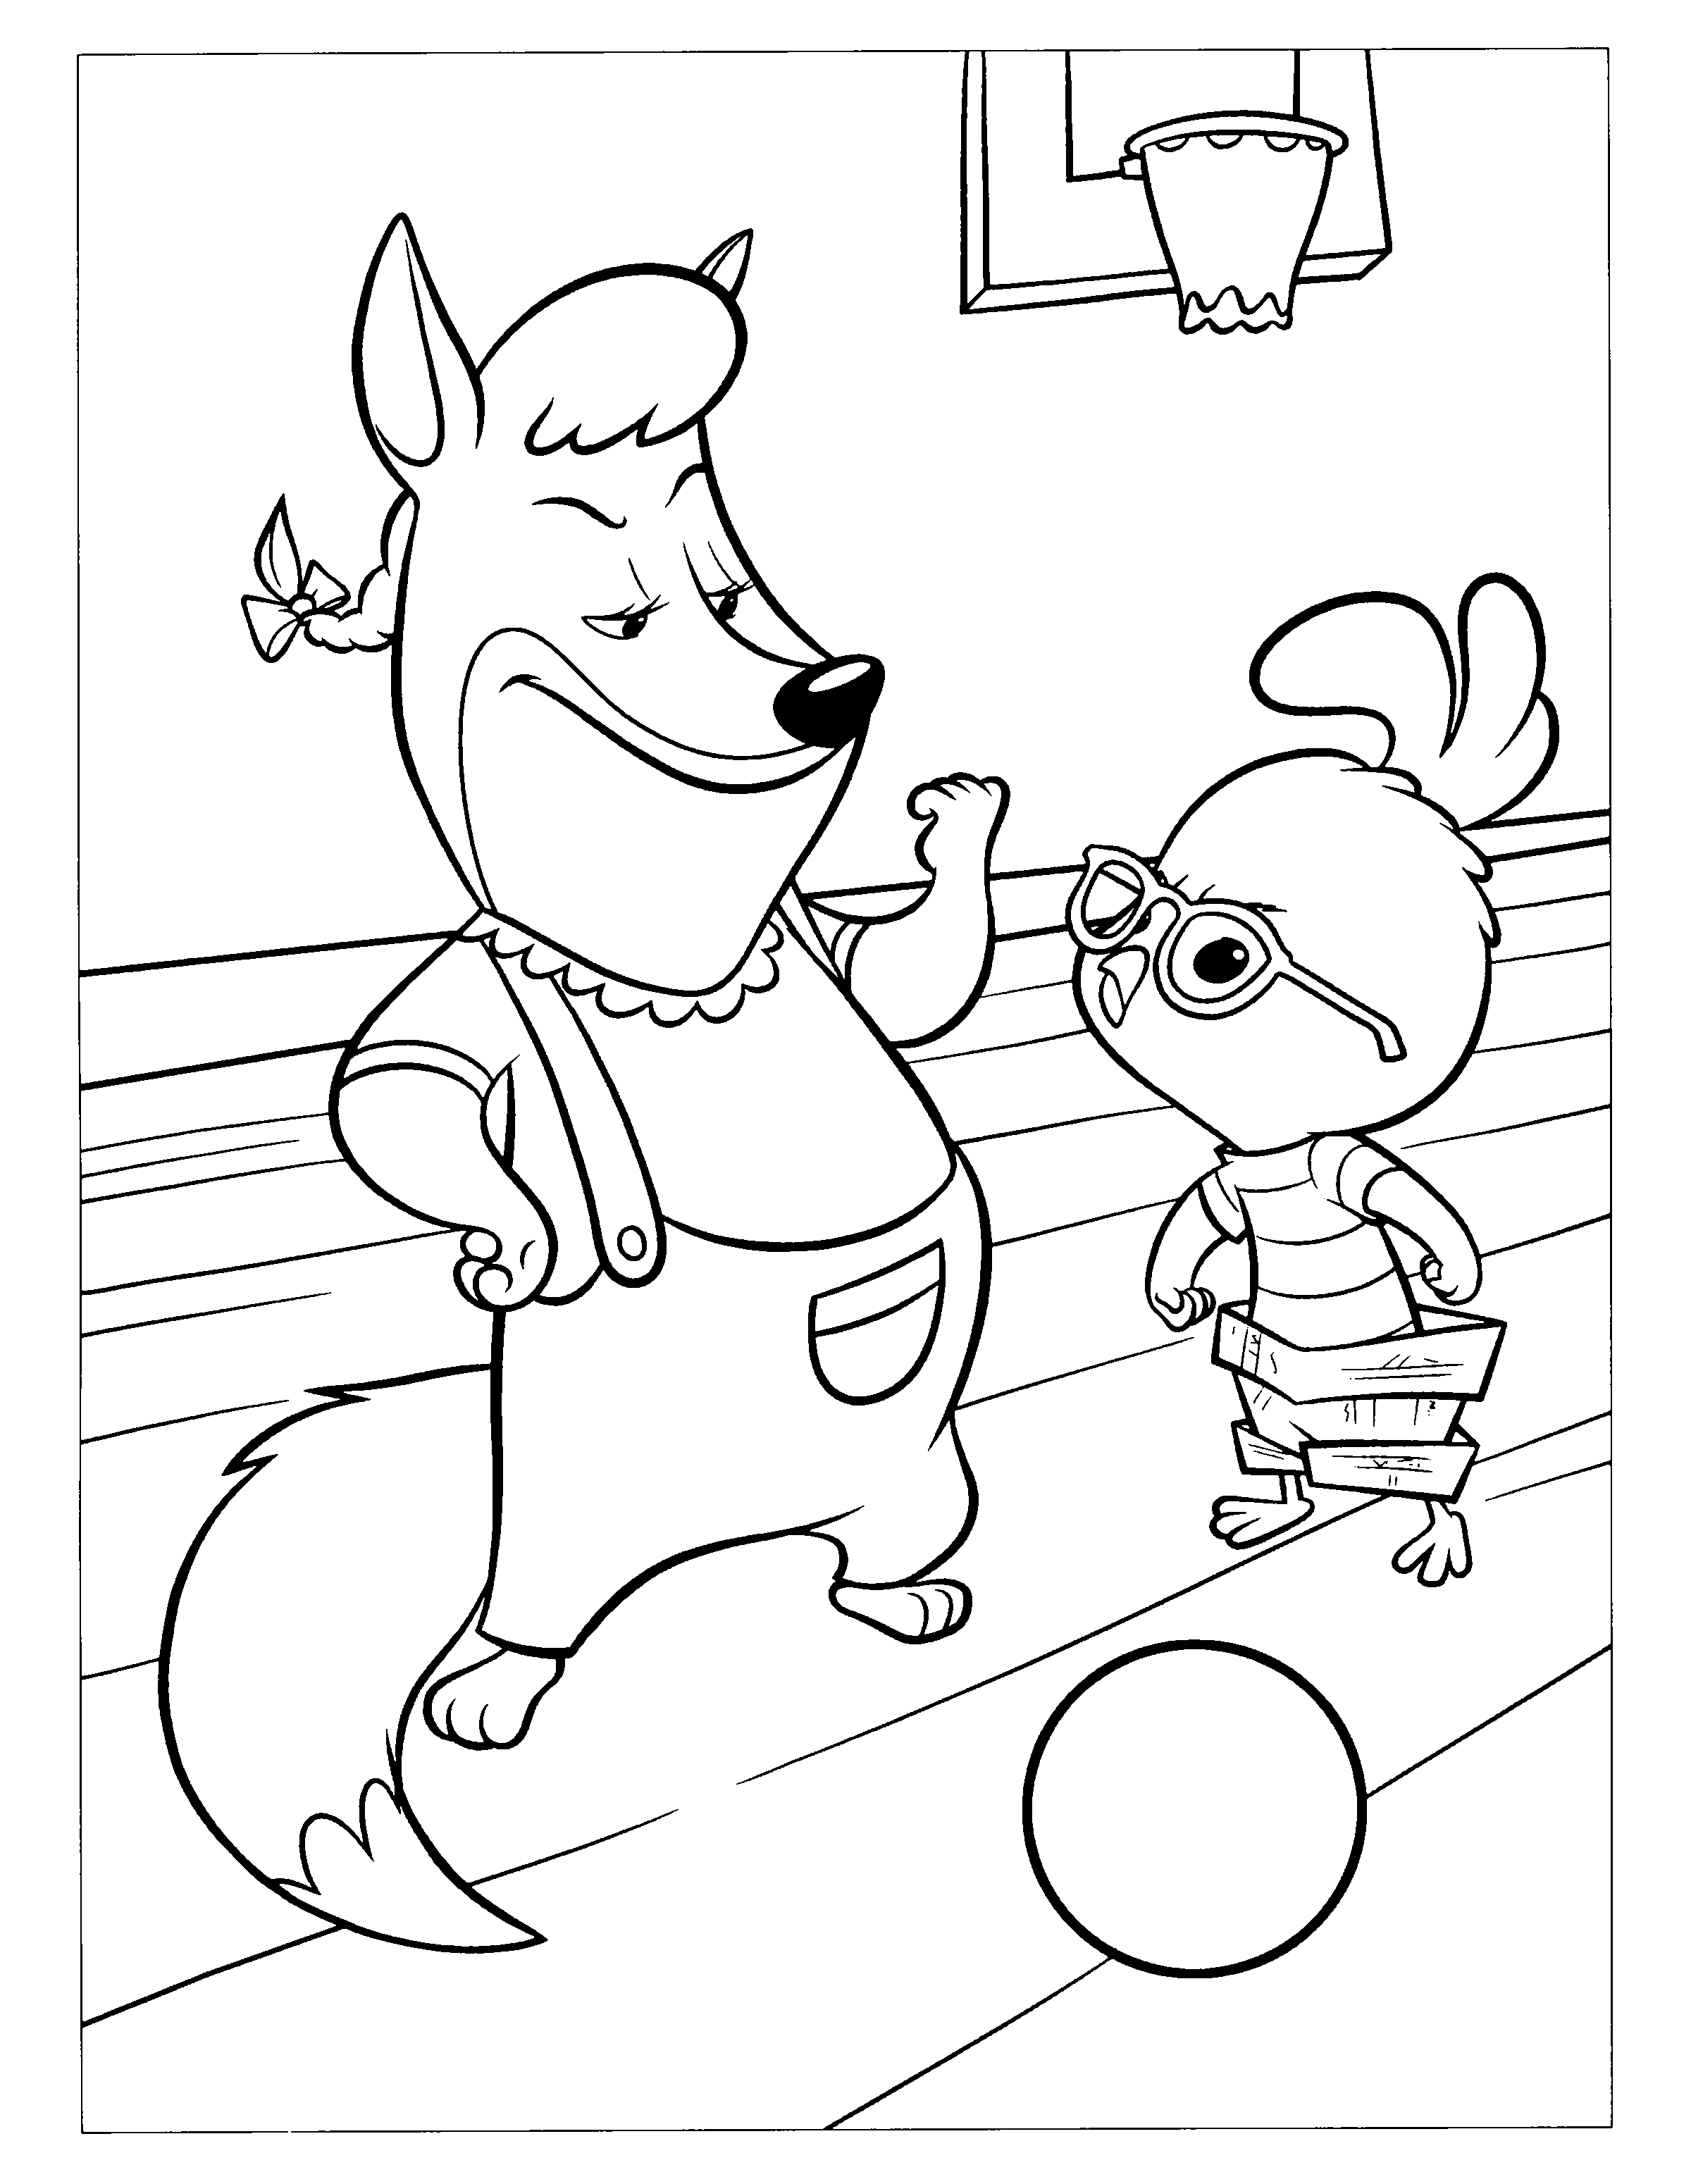 Chiken little Coloring Pages